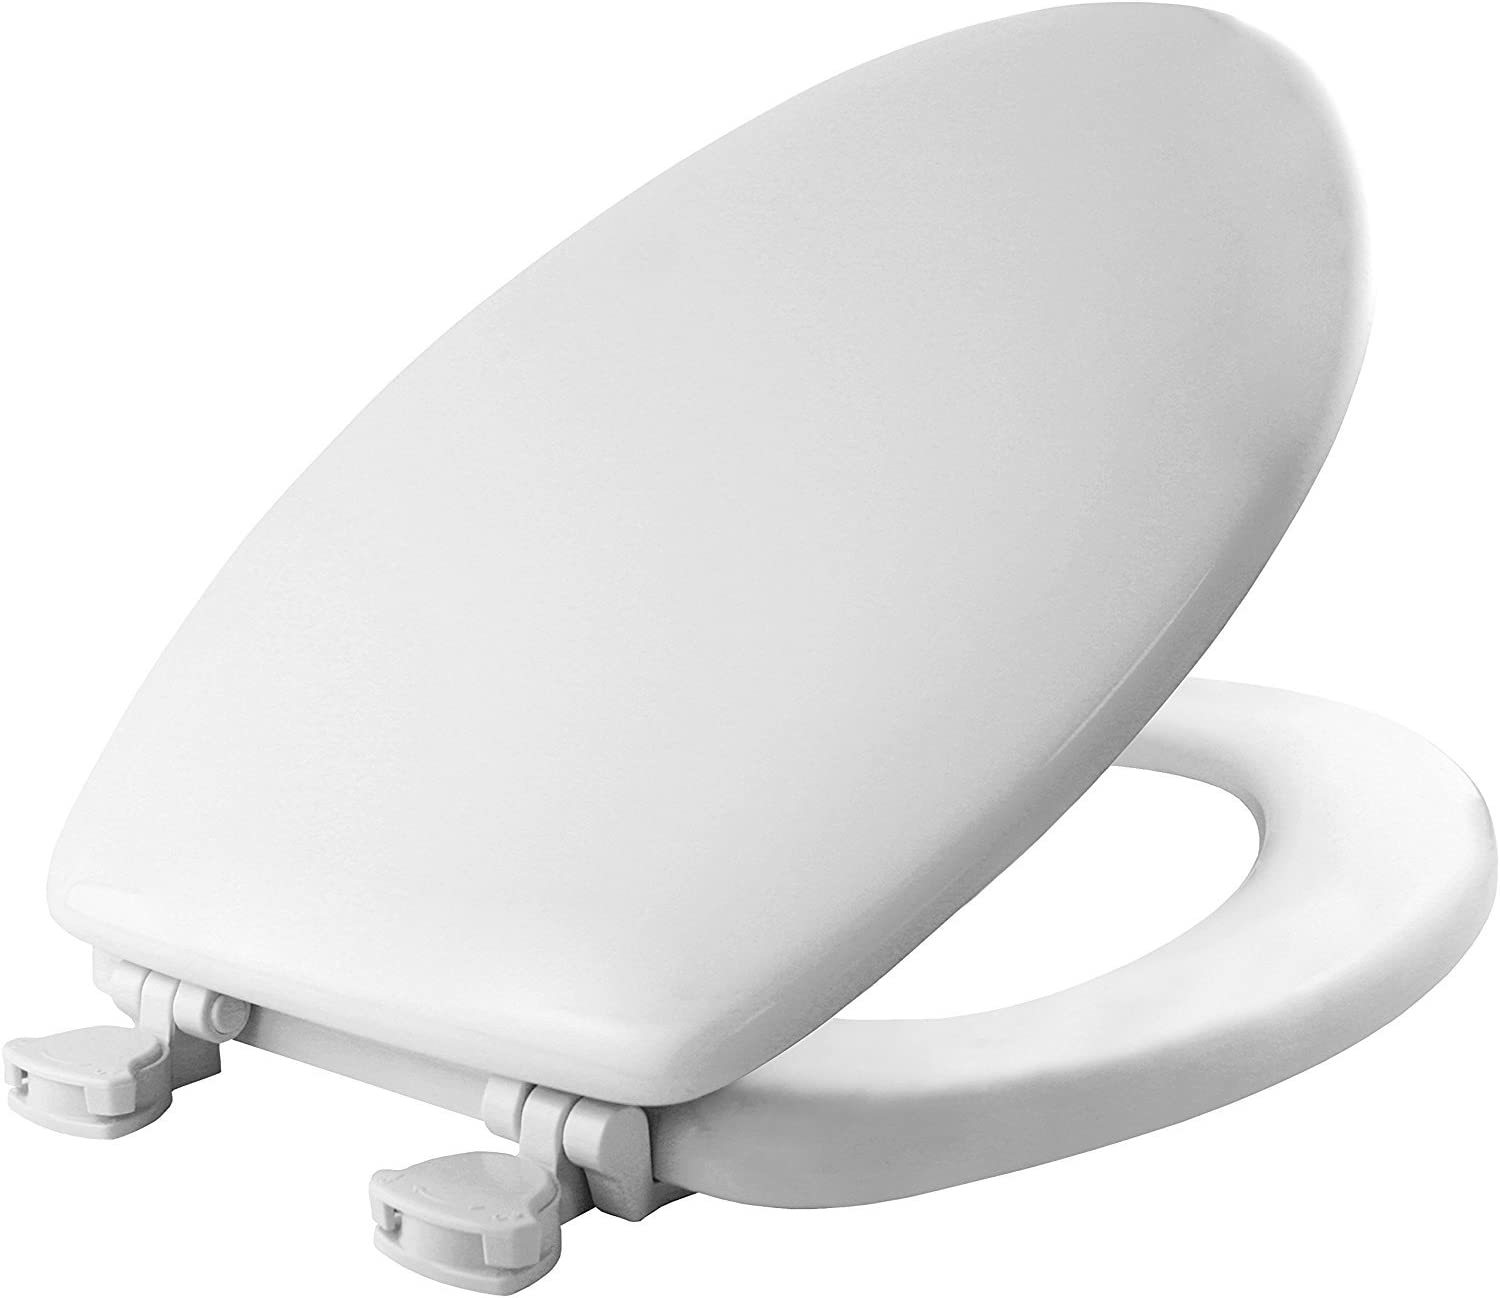 Primary image for Elongated, White, Mayfair Molded Wood Toilet Seat, 1844Ec 000, With Simple-Clean